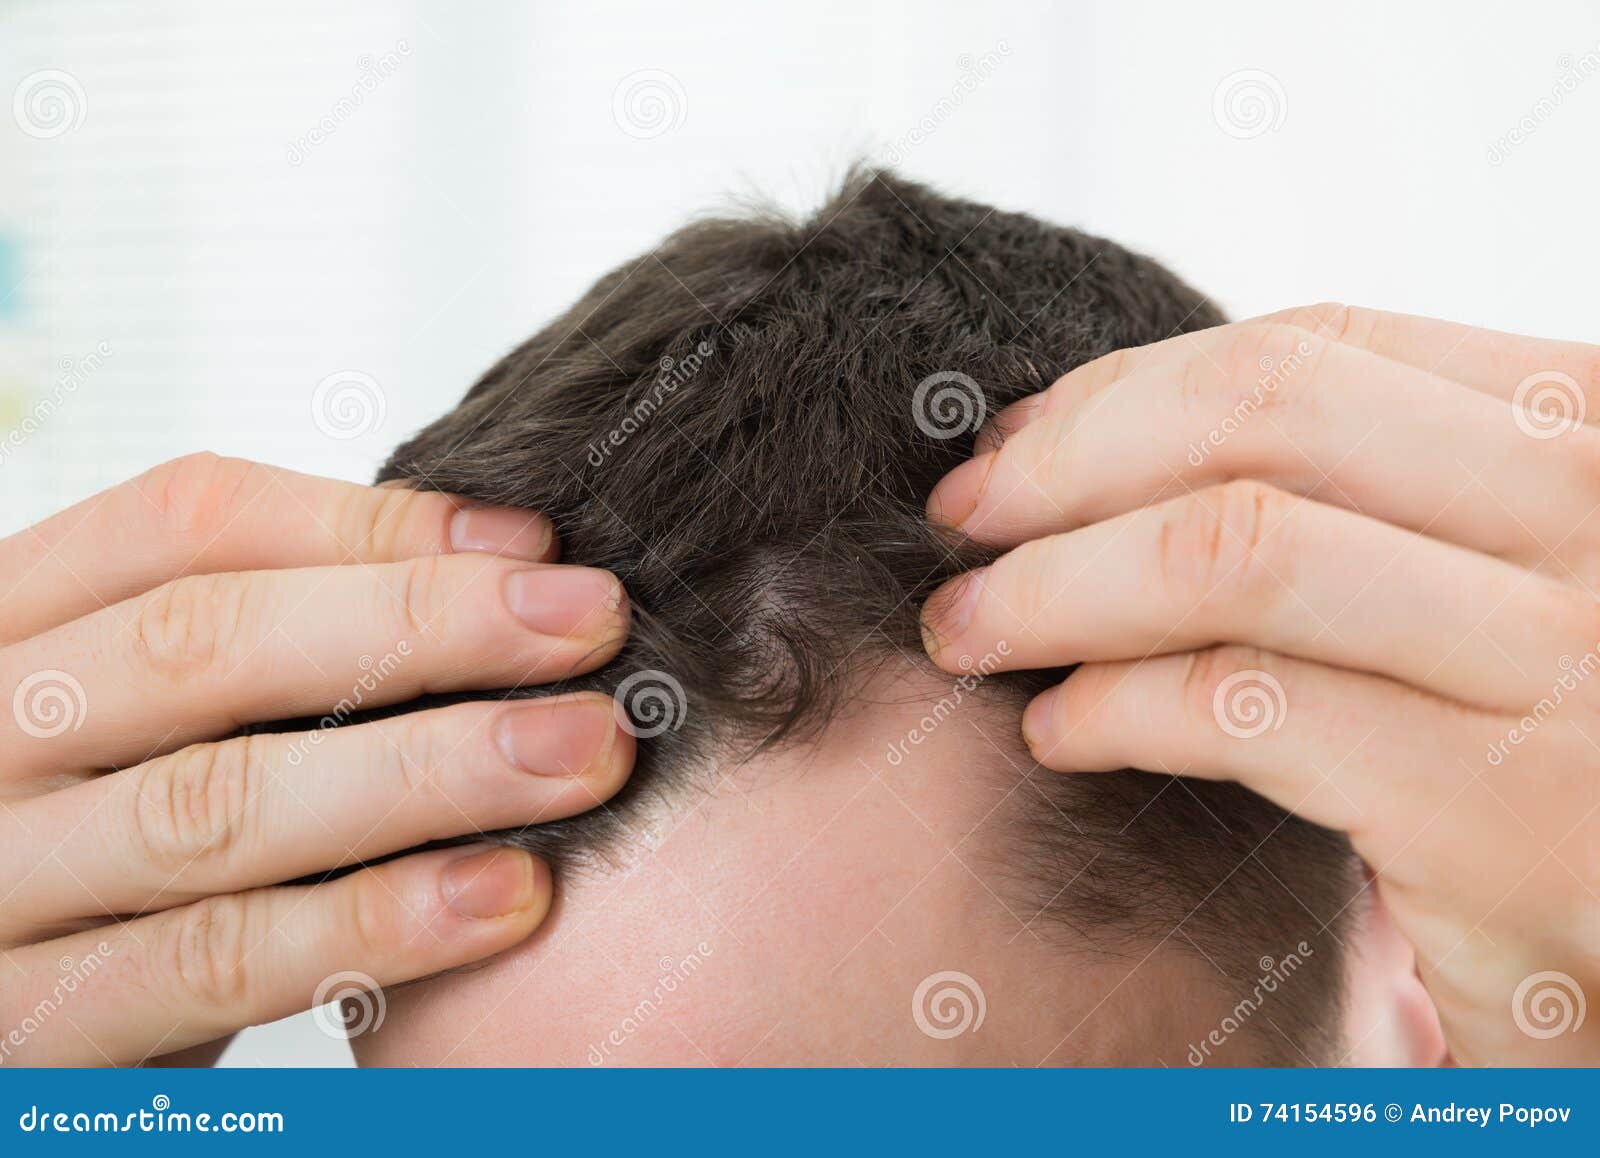 man checking hairline at home